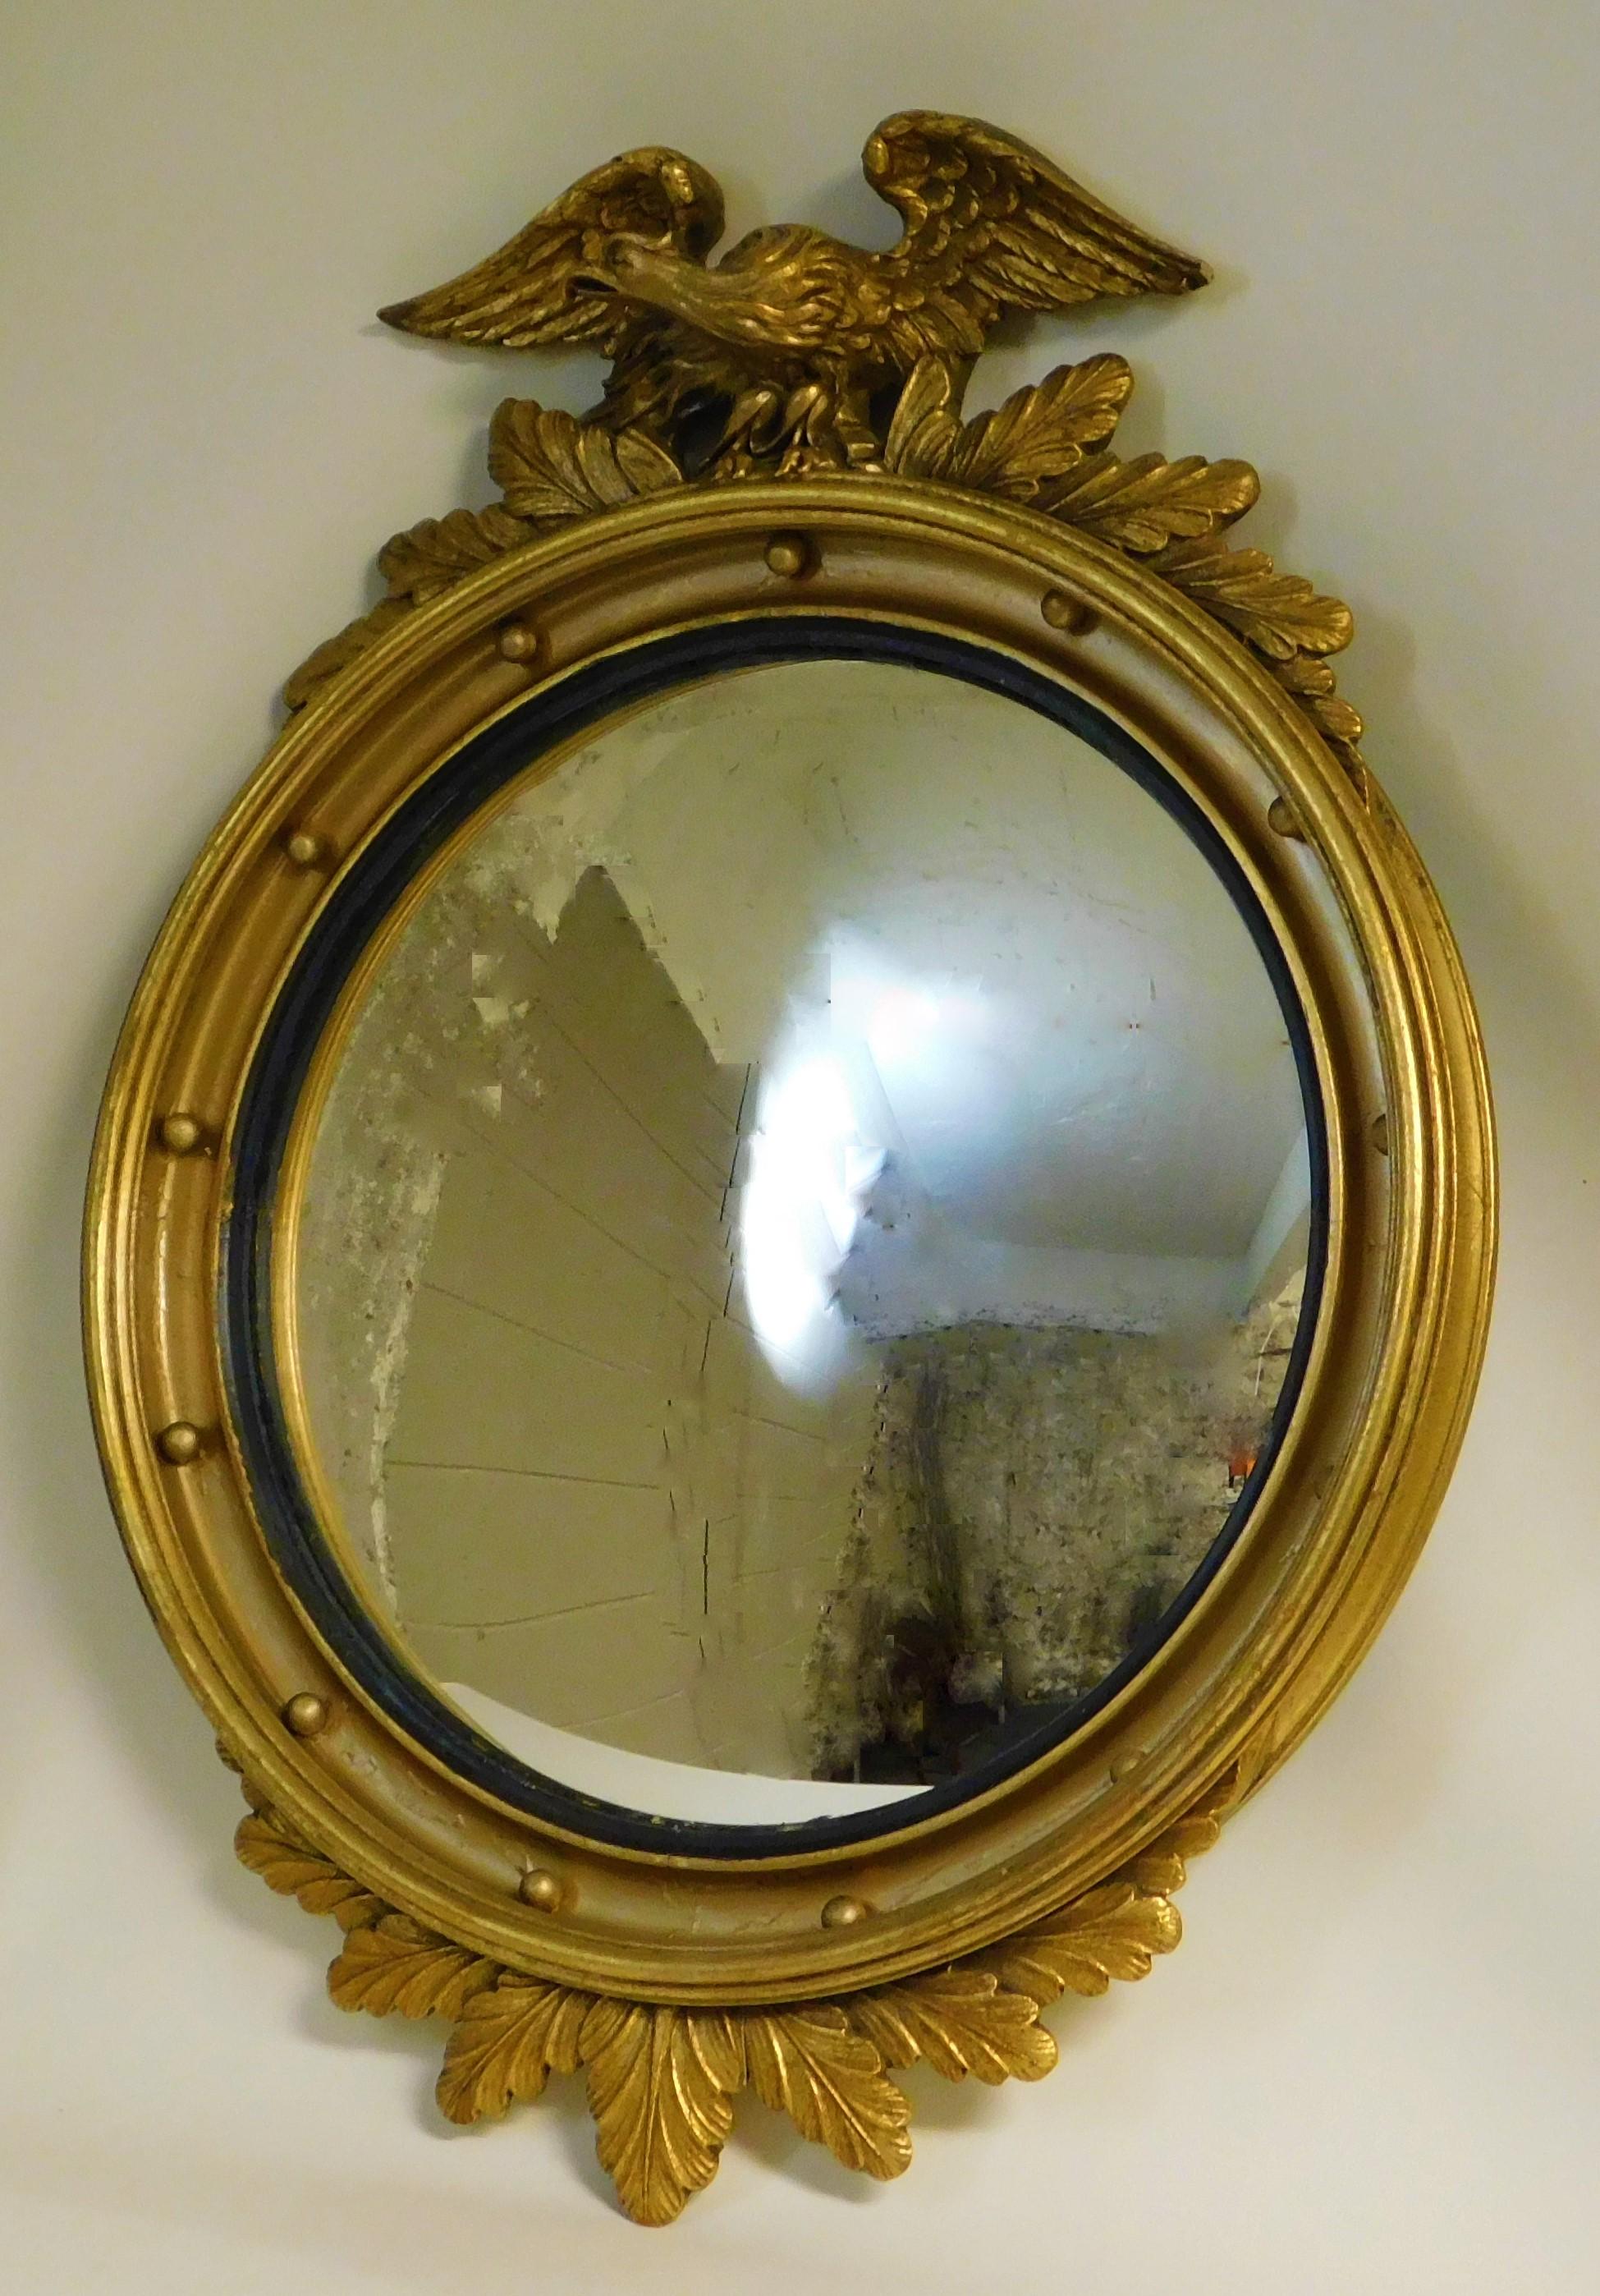 Large American Gilt Carved Wood Eagle Oval Convex Wall Mirror, circa 1890 In Good Condition For Sale In Hamilton, Ontario